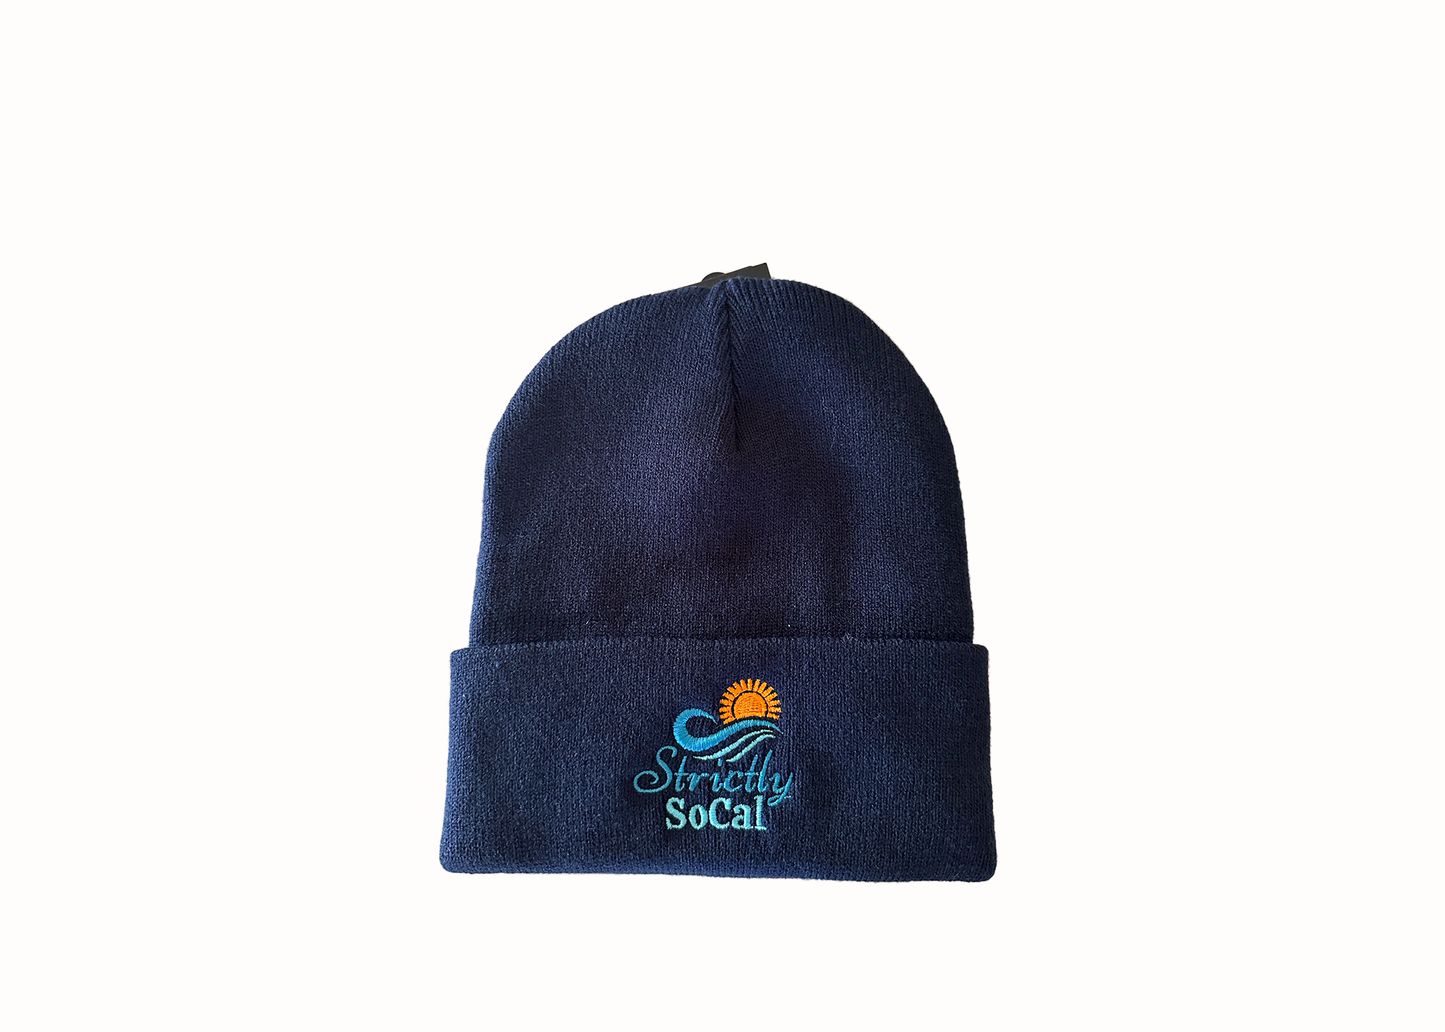 Strictly SoCal Beanie